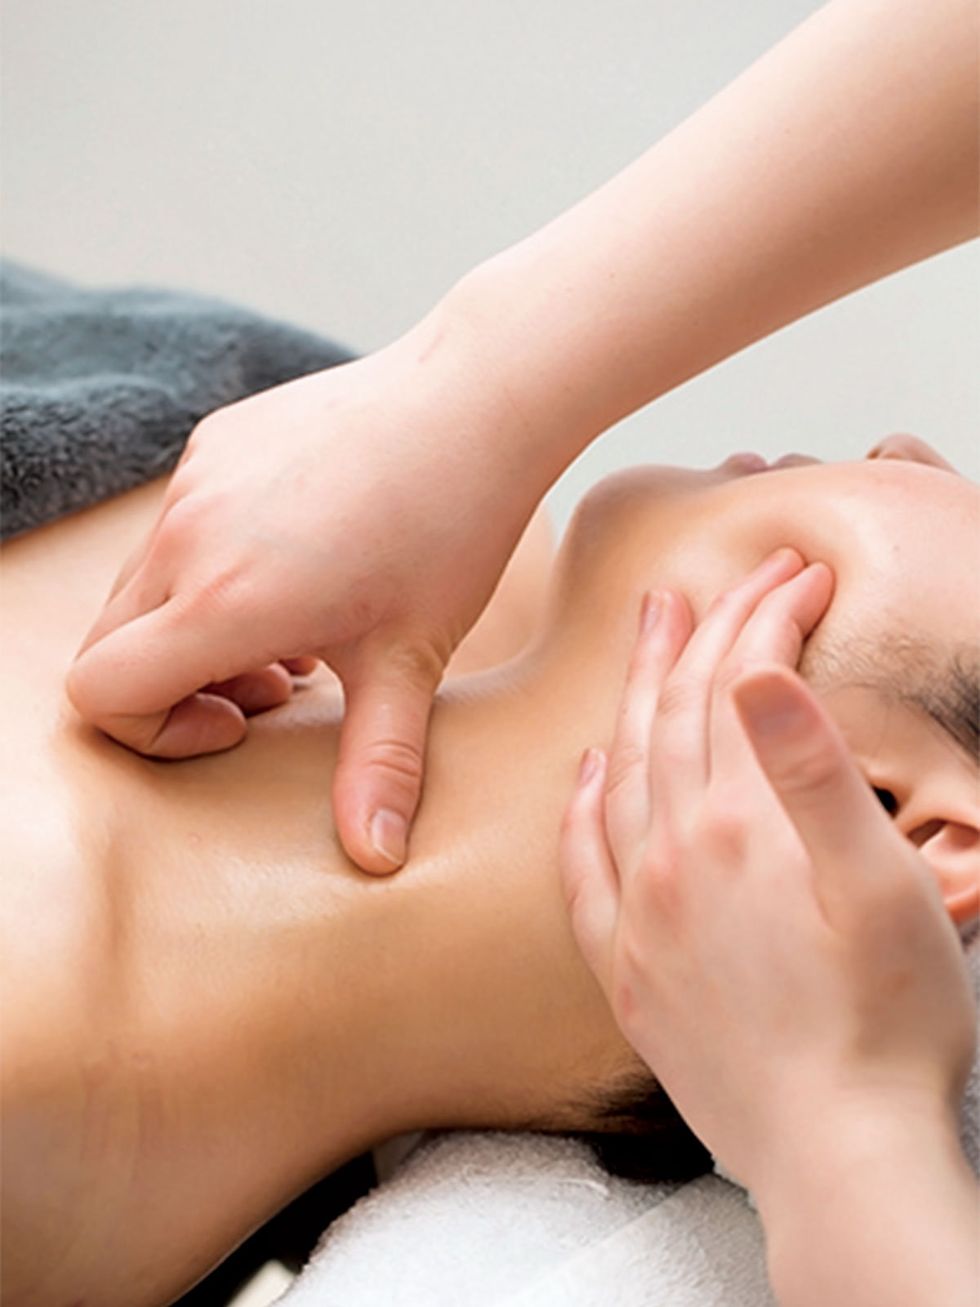 Skin, Chiropractor, Close-up, Massage, Hand, Therapy, Joint, Muscle, Neck, Finger, 